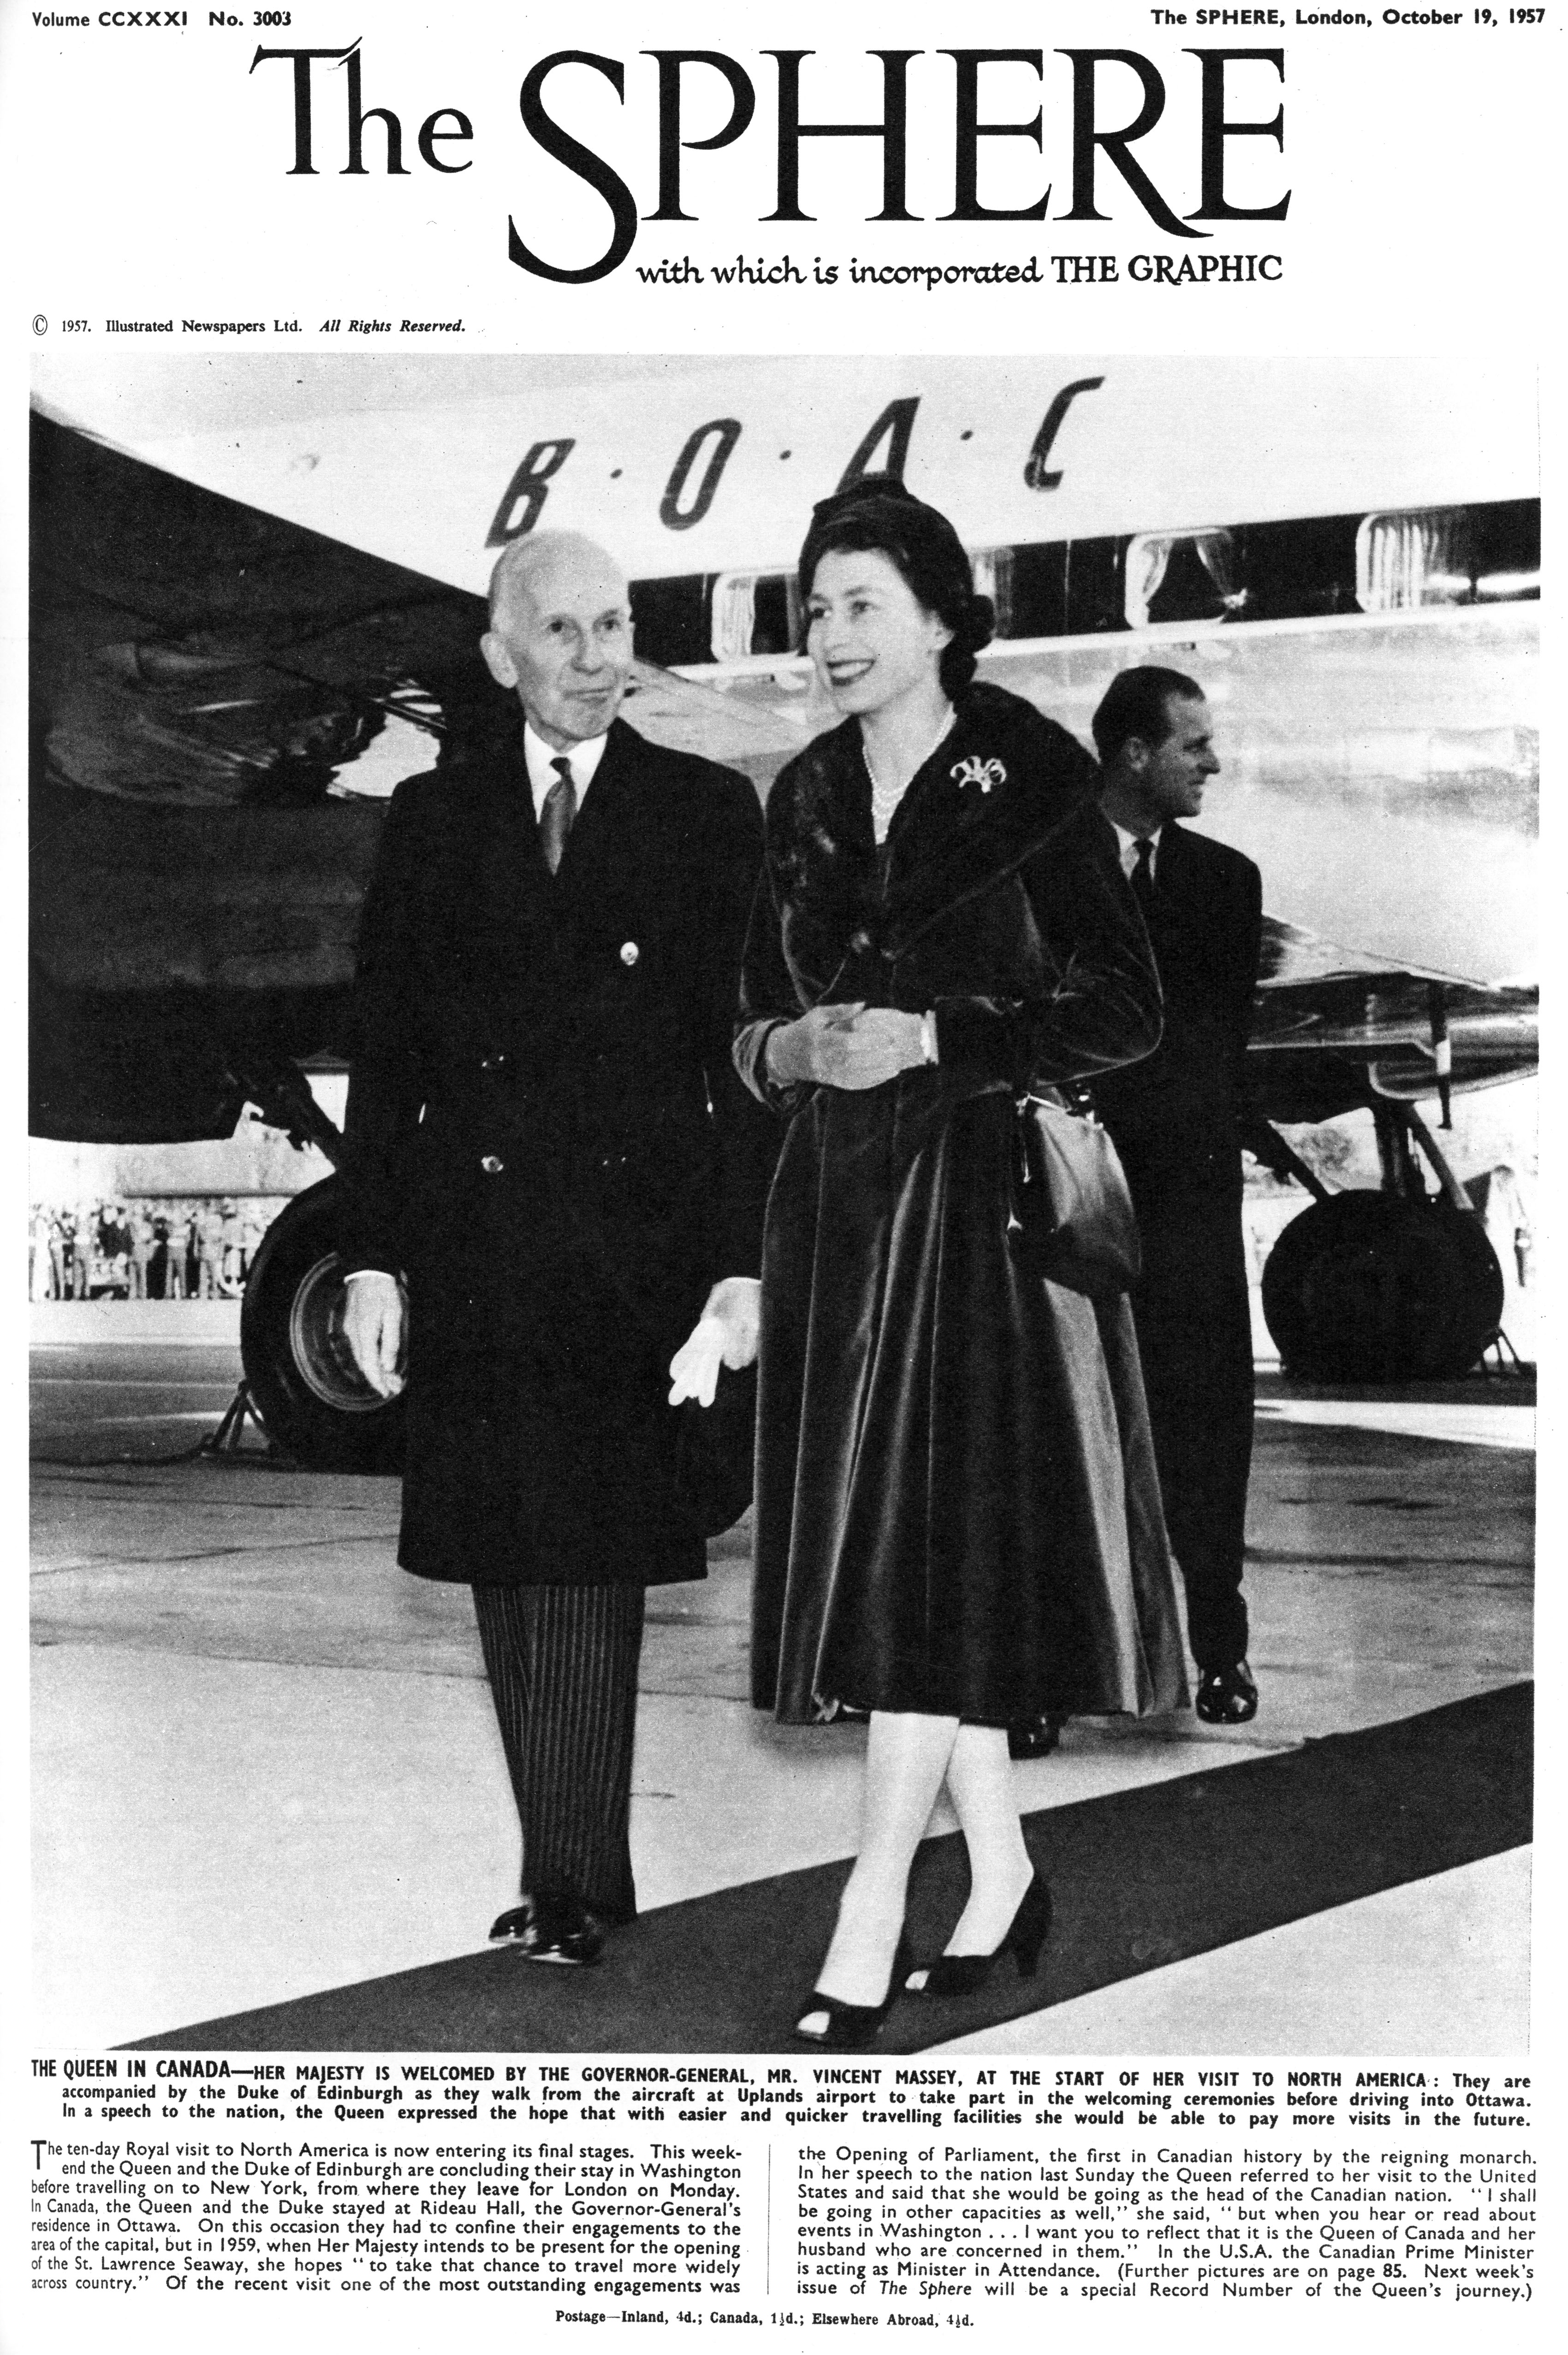 First Anniversary The Queen’s Death - Her Majesty is welcomed by Governor-General Mr. Vincent Massey at the start of her visit to North America in 1957